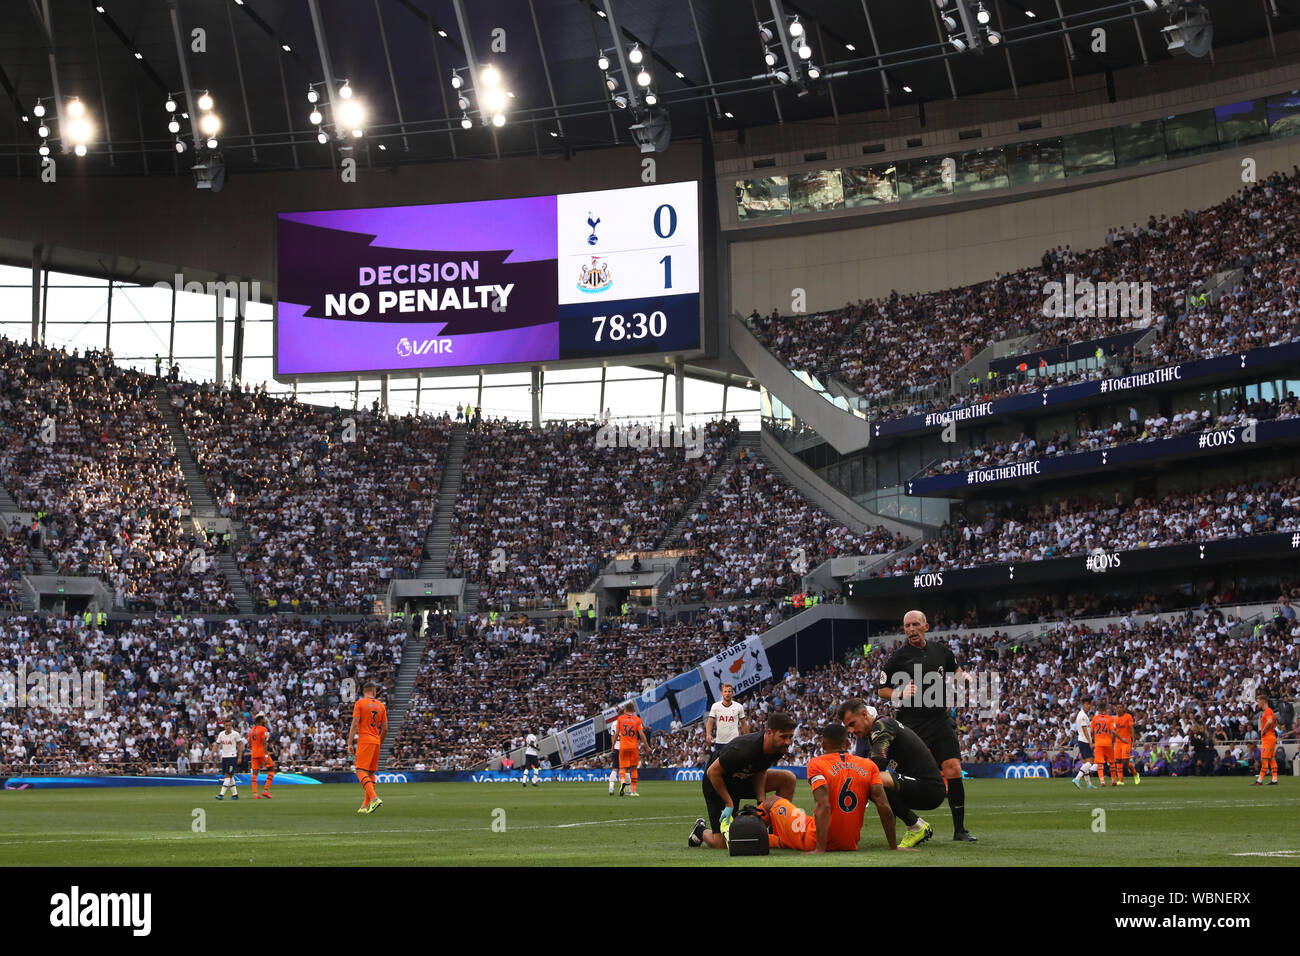 VAR decides no penalty following the incident when Harry Kane of Tottenham Hotspur goes down in the penalty area after battling with Jamaal Lascelles of Newcastle United - Tottenham Hotspur v Newcastle United, Premier League, Tottenham Hotspur Stadium, London (Tottenham), UK - 25th August 2019  Editorial Use Only - DataCo restrictions apply Stock Photo